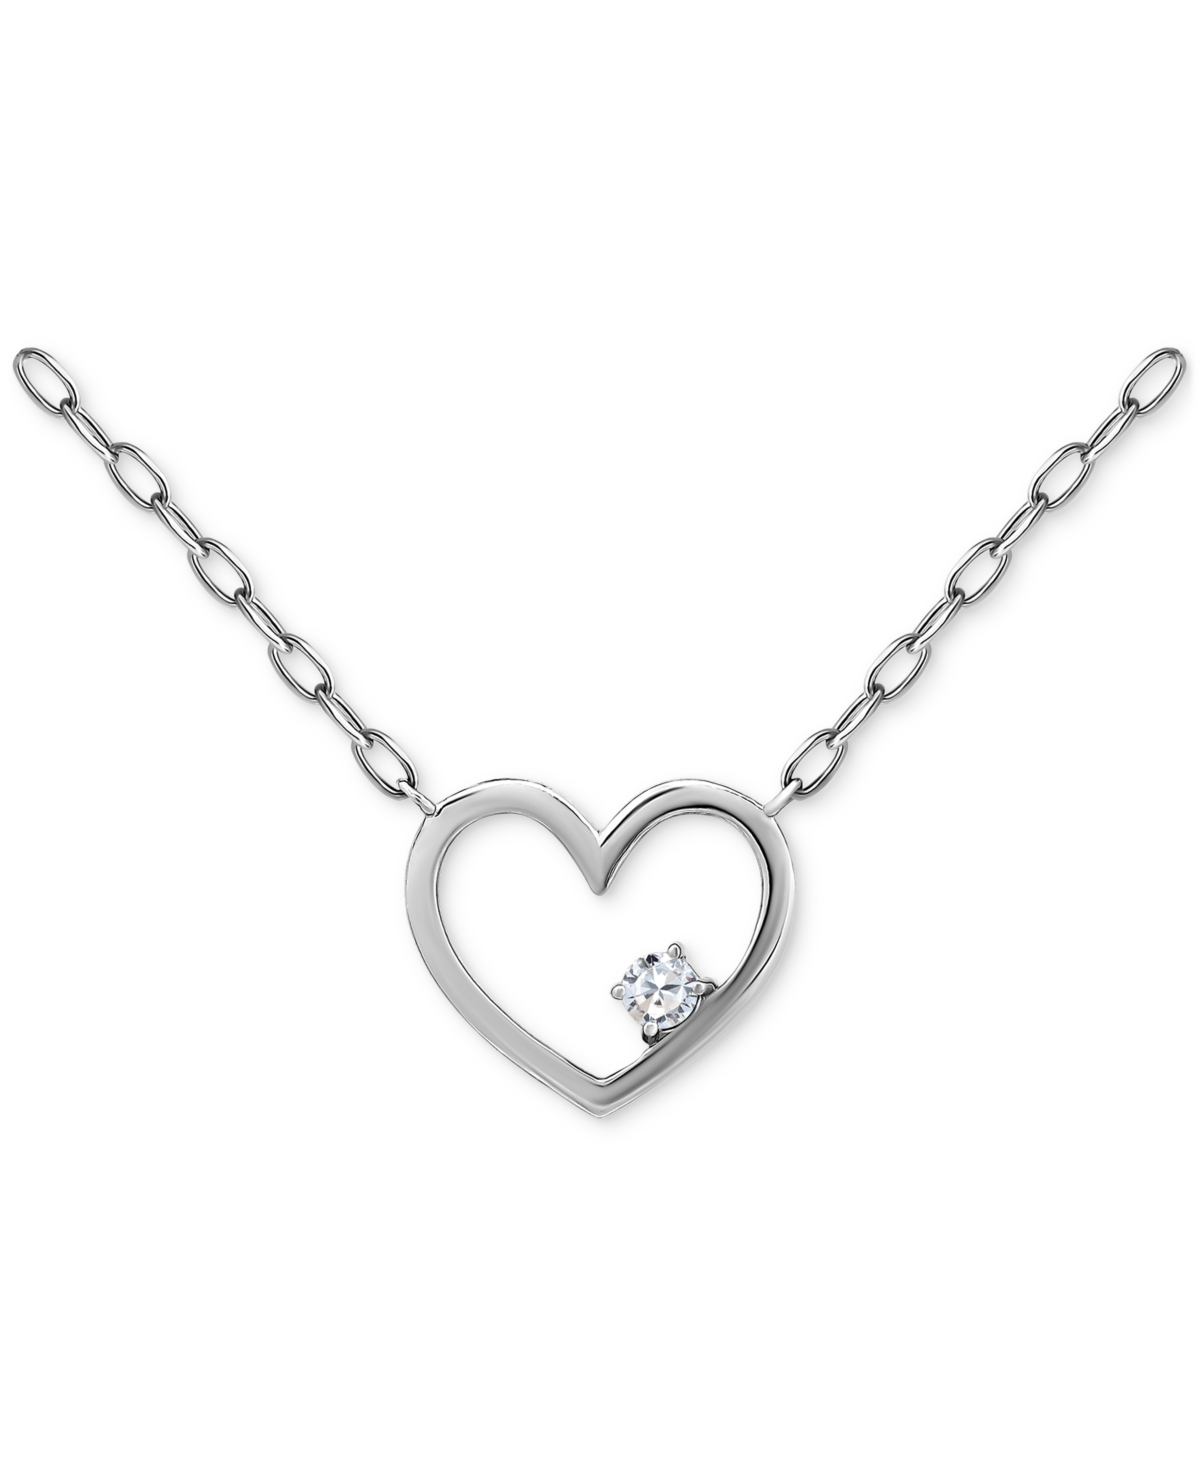 Giani Bernini Cubic Zirconia Accent Open Heart Pendant Necklace In Sterling Silver, 16" + 2" Extender, Created For In Gold Over Silver